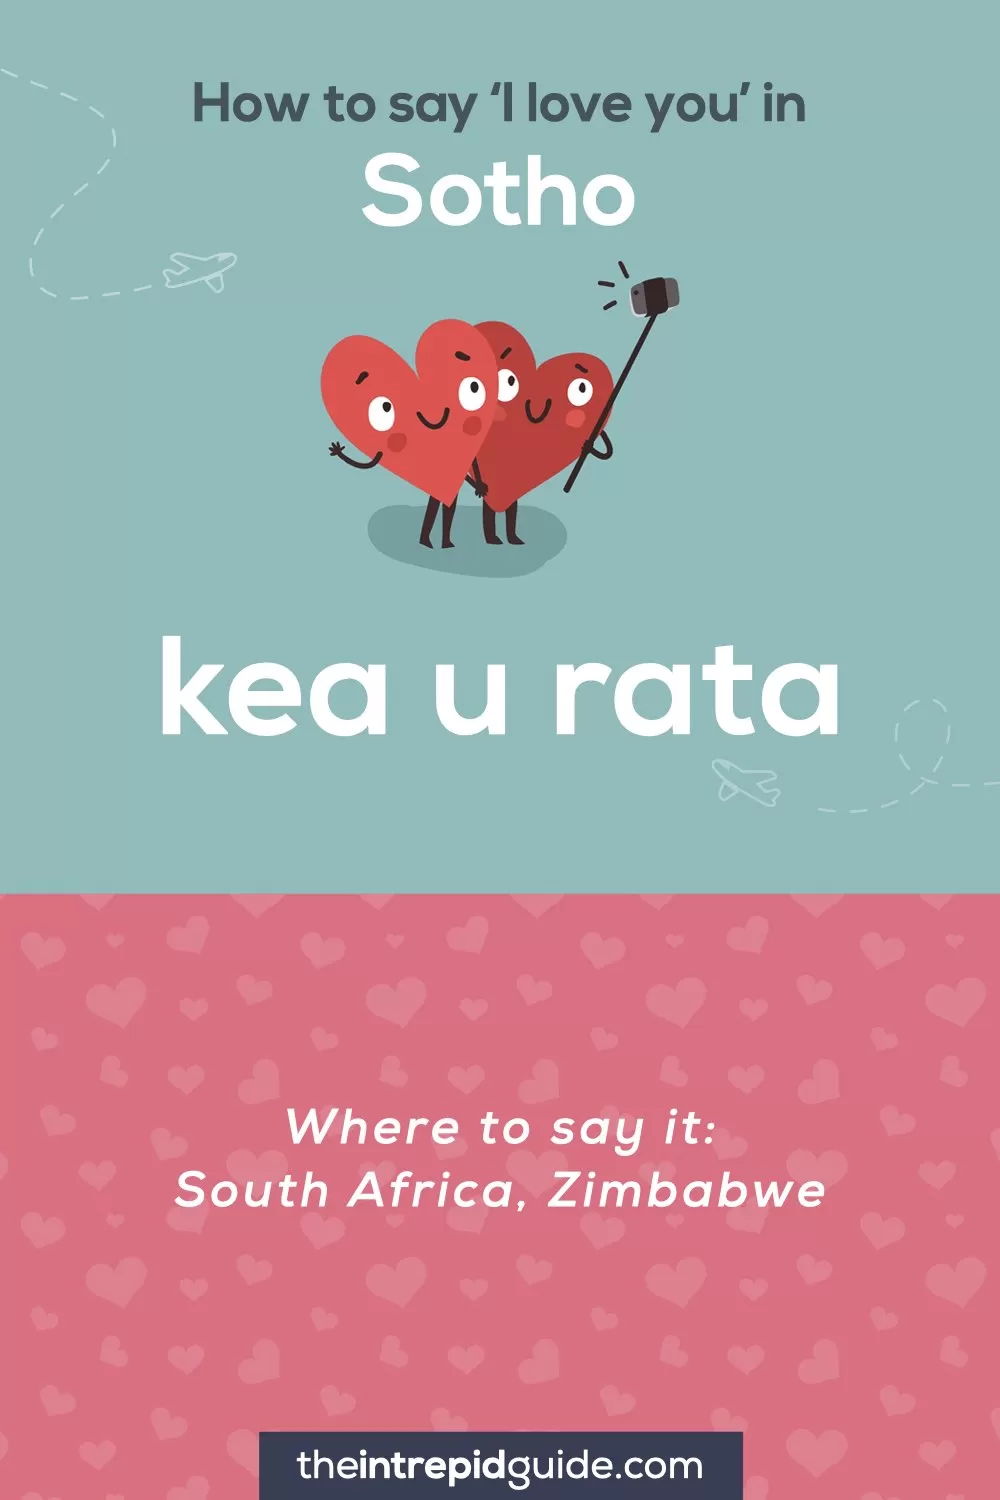 How to say I love you in different languages - Sotho - kea u rata